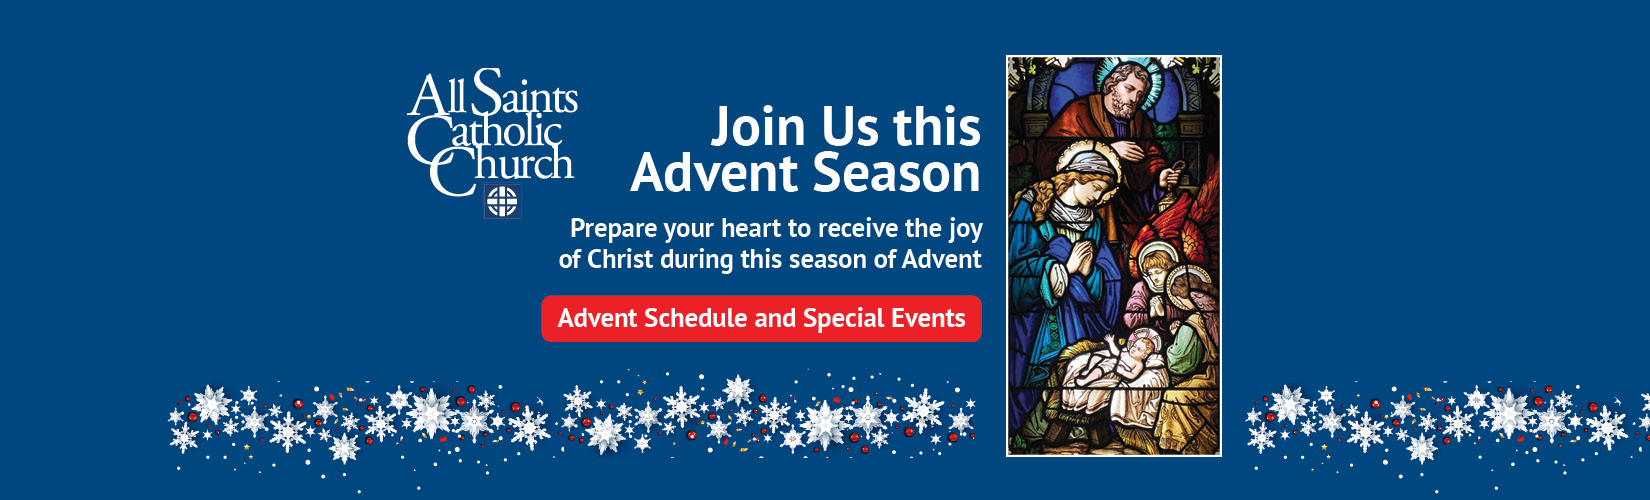 Join All Saints this Advent Season